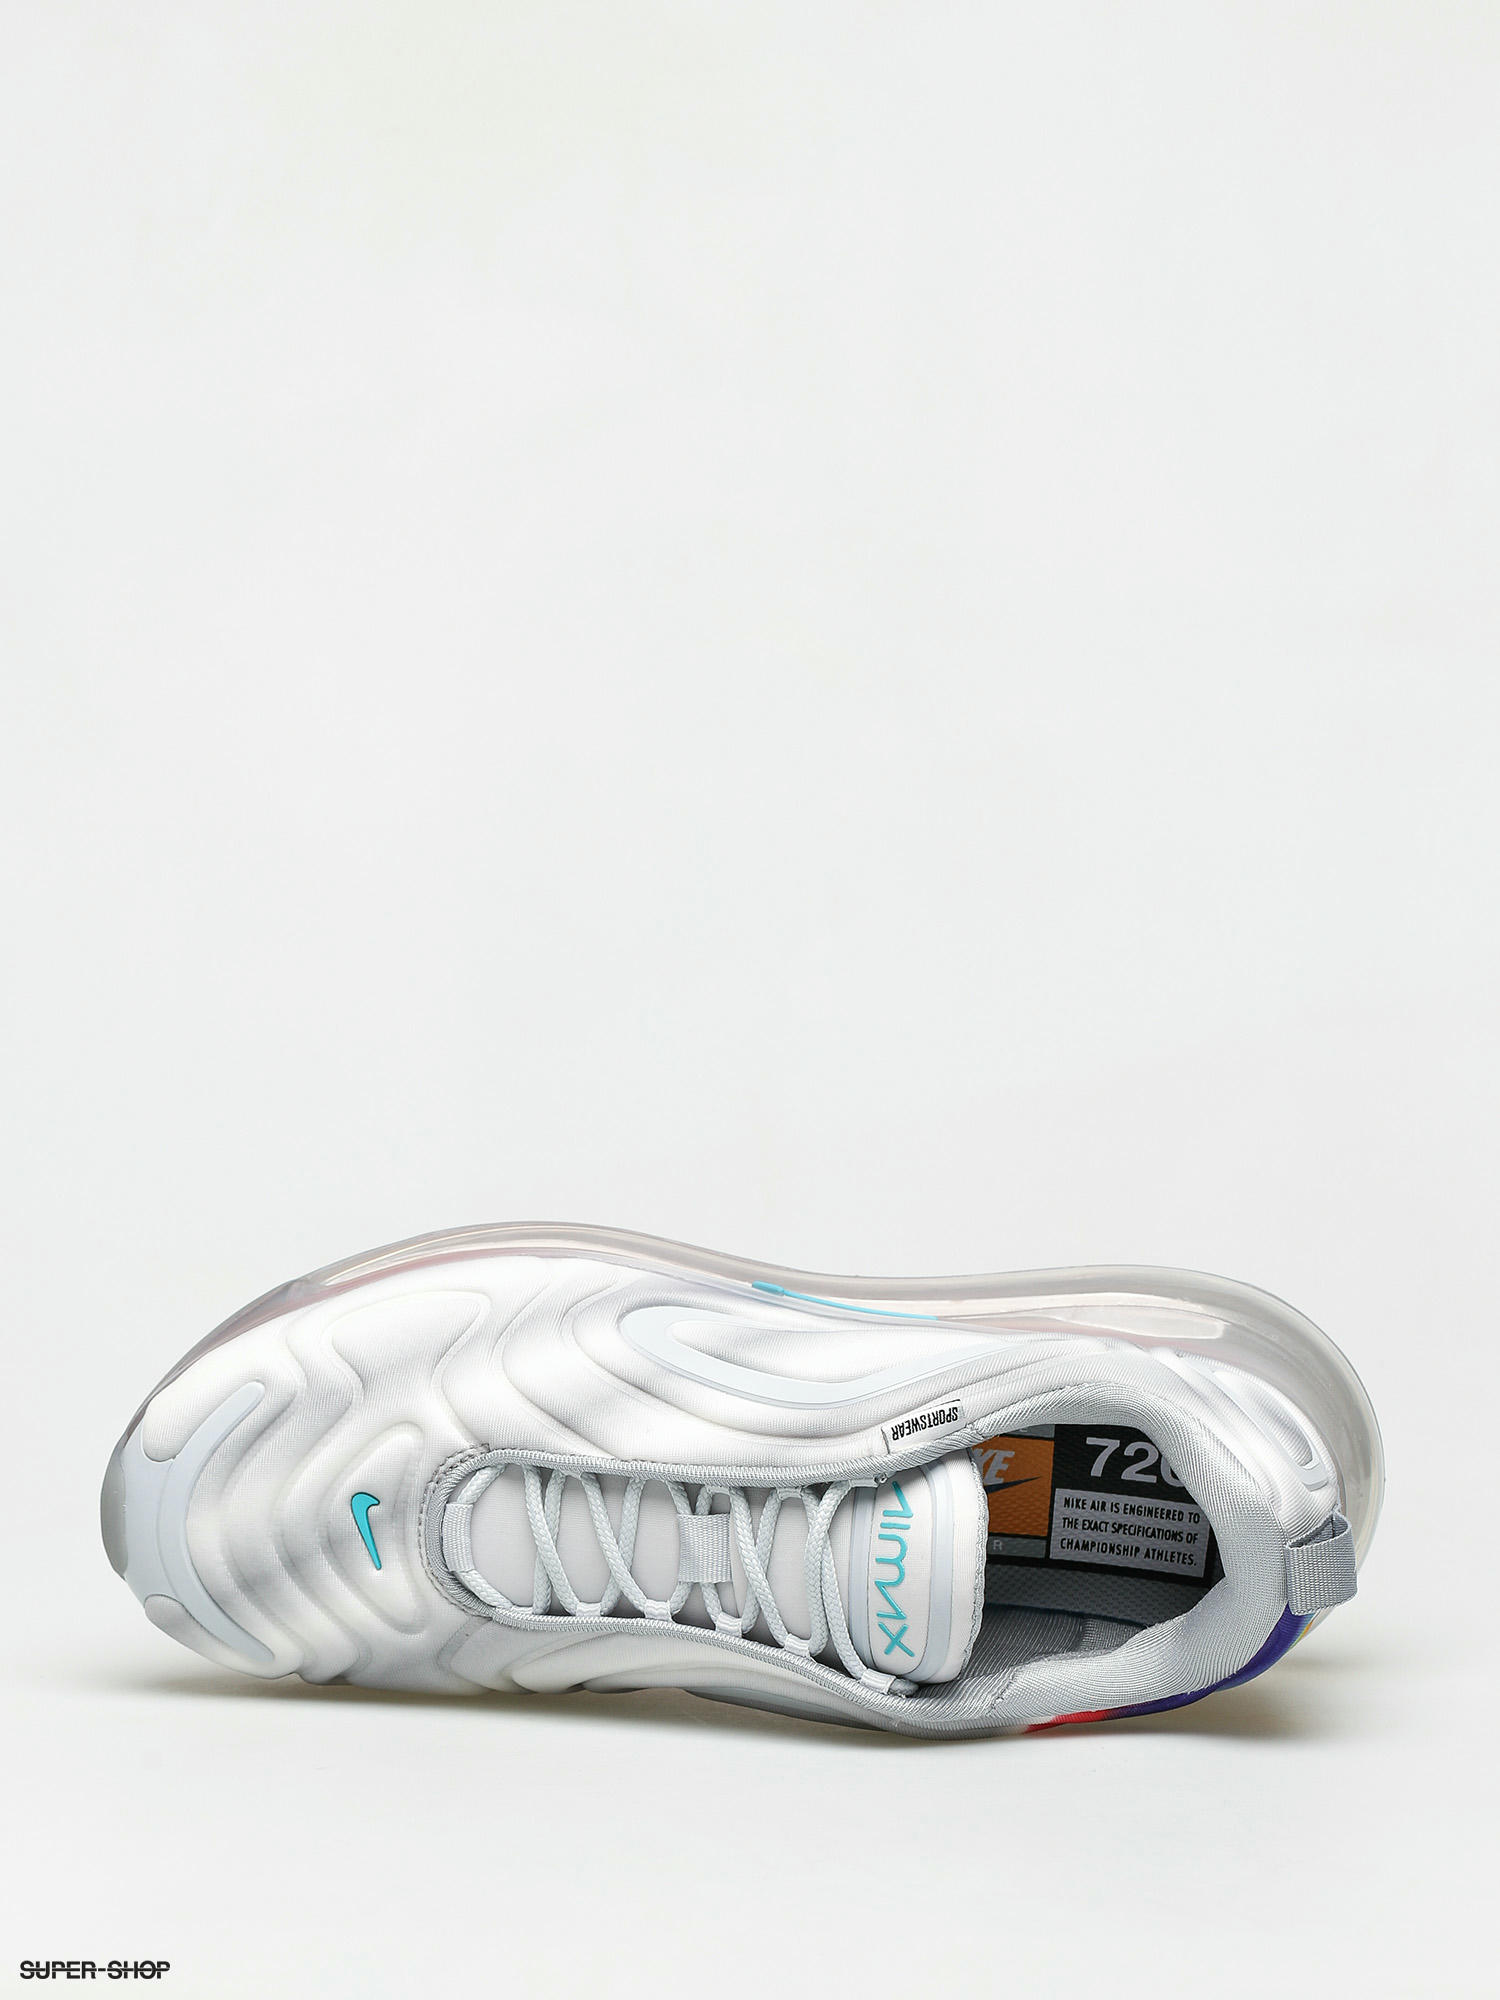 Nike Air Max 720 Shoes (wolf grey/teal 